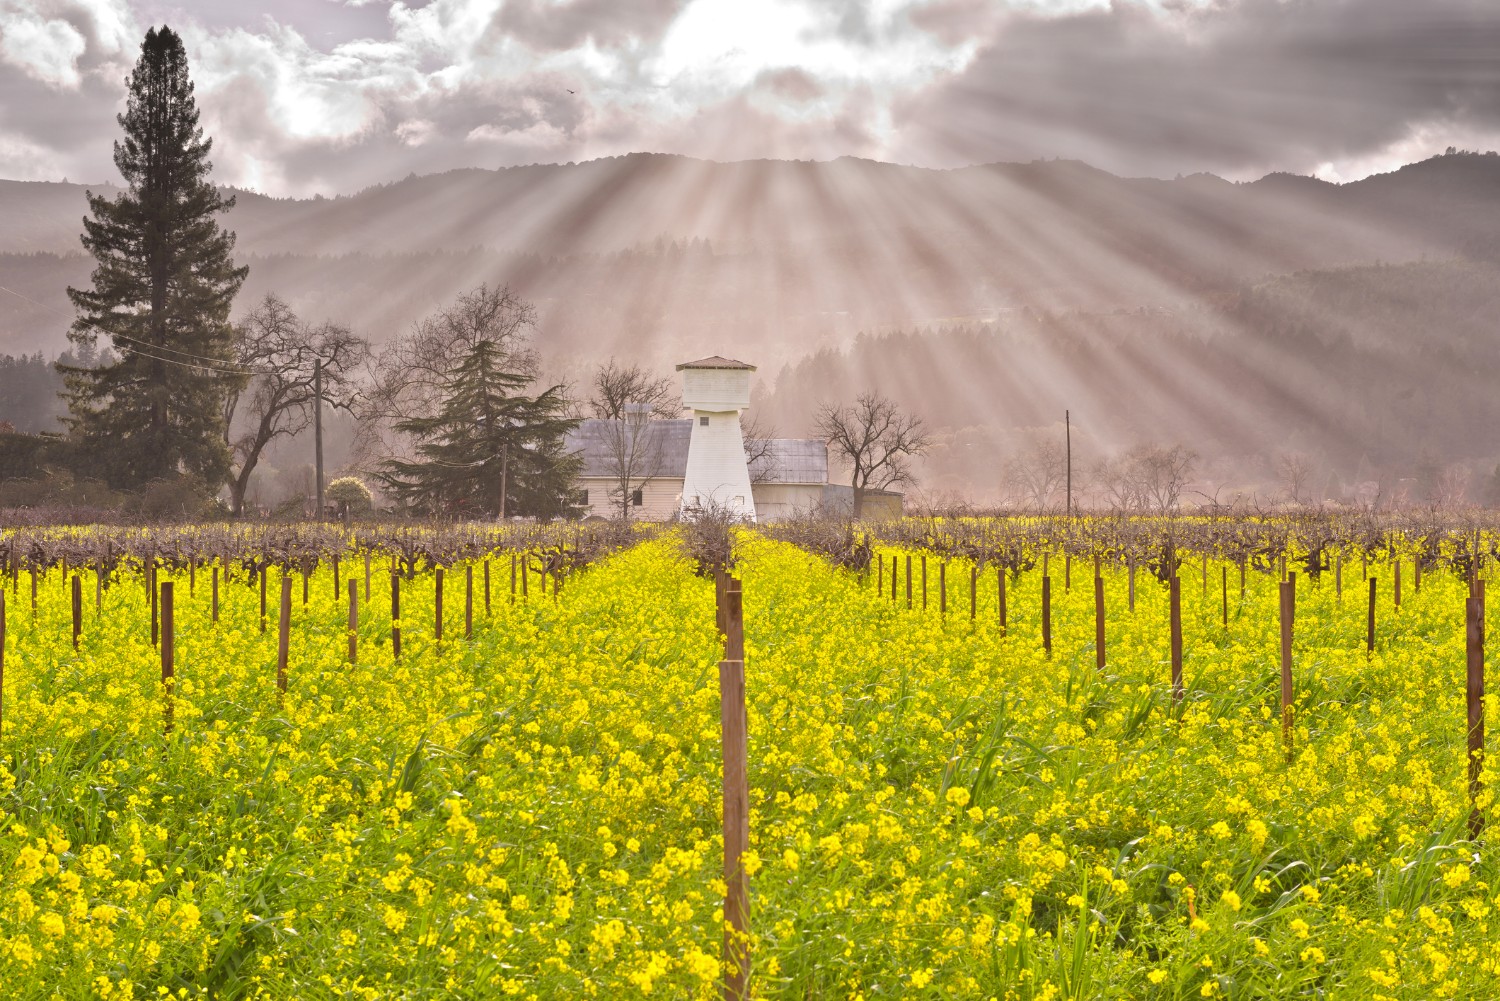 Napa Valley vineyards and mustard yellow flowers beneath a beautiful light pouring from the sky